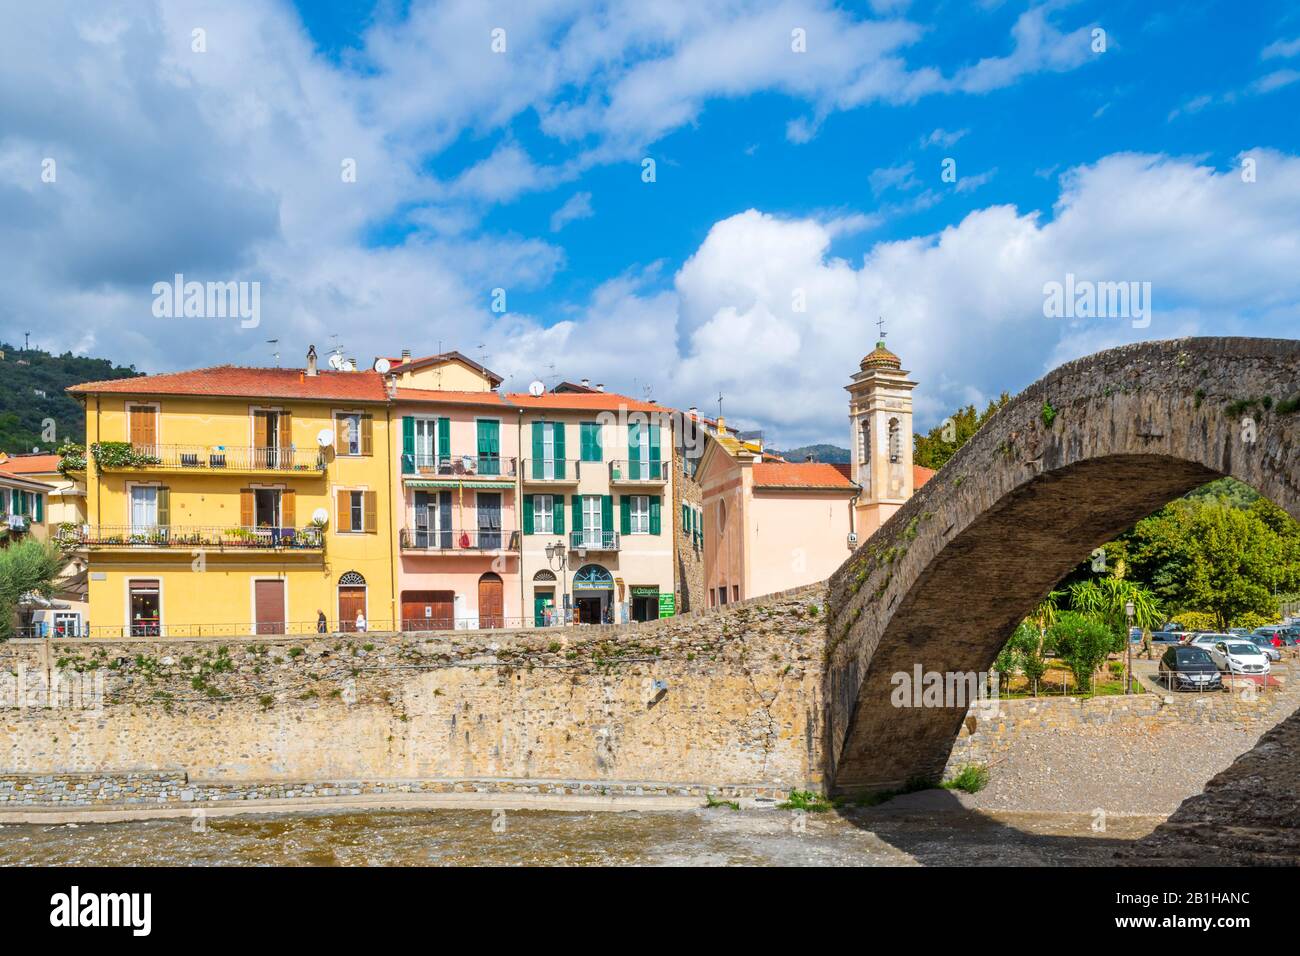 The famous, medieval Monet bridge with the Church of San Filippo next to it in the historic ancient hilltop city of Dolceacqua, Italy. Stock Photo